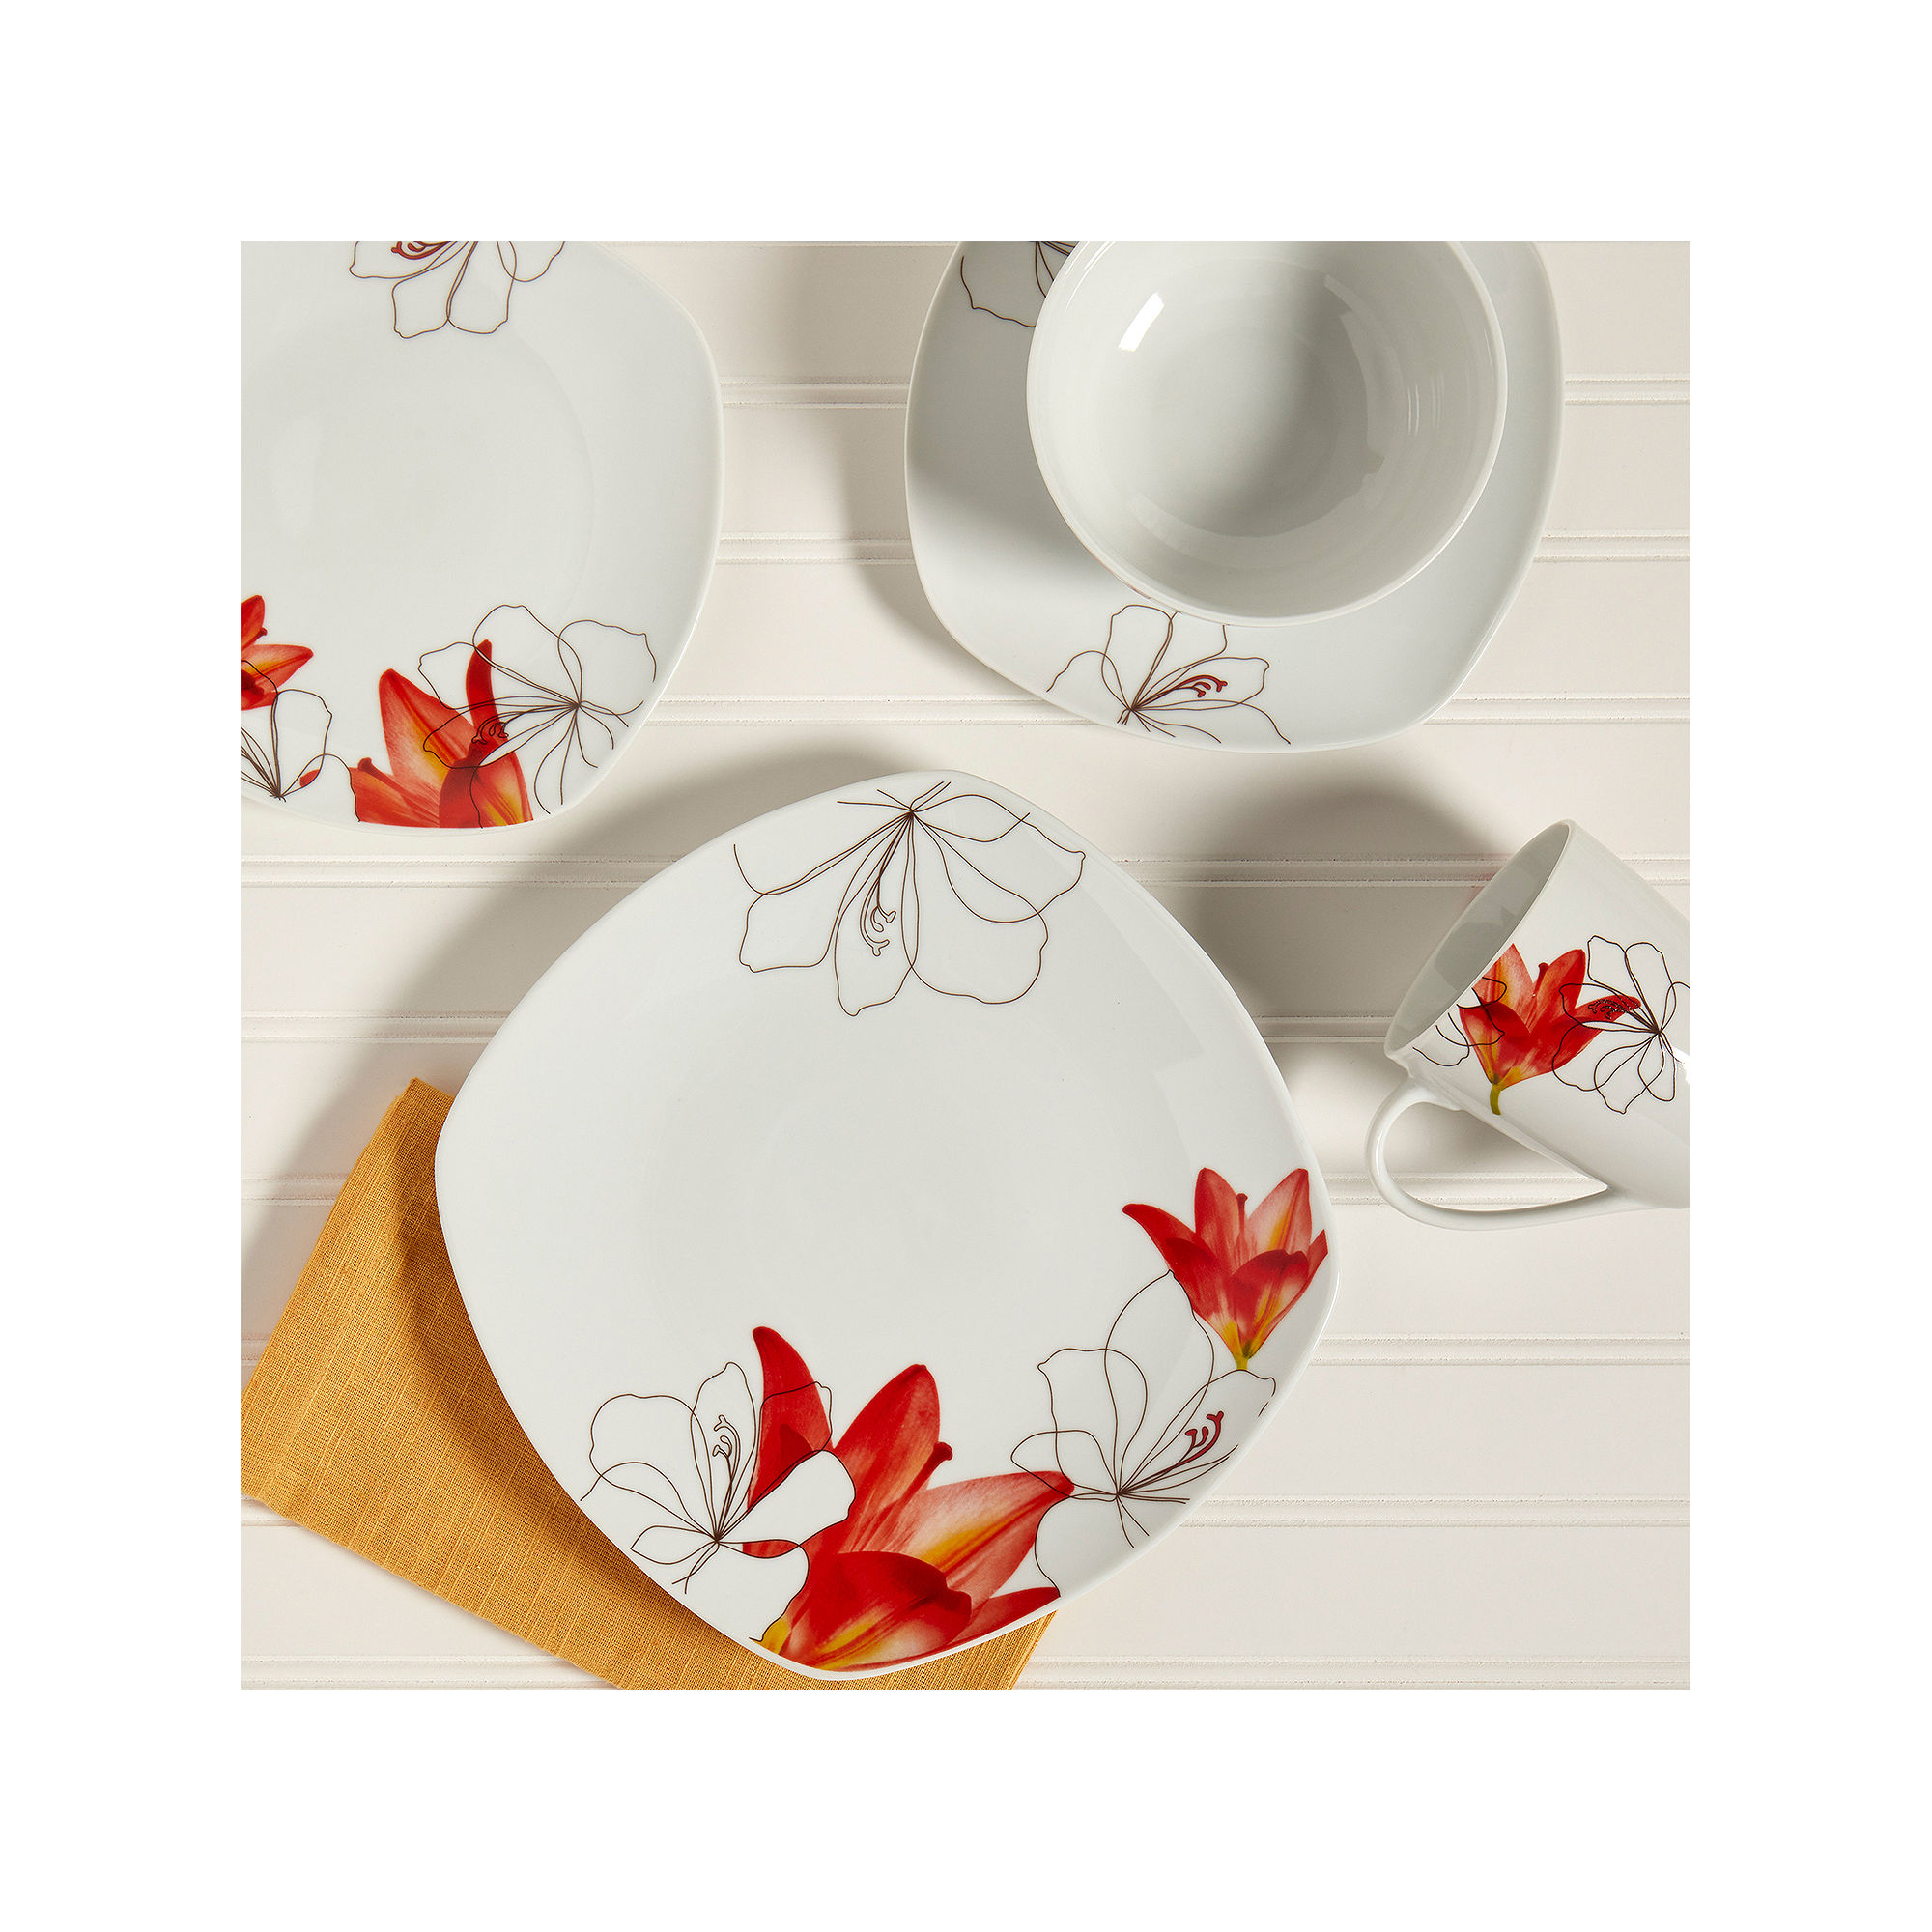 Lily 16 Piece Dinnerware Set, Service for 4 - image 2 of 10